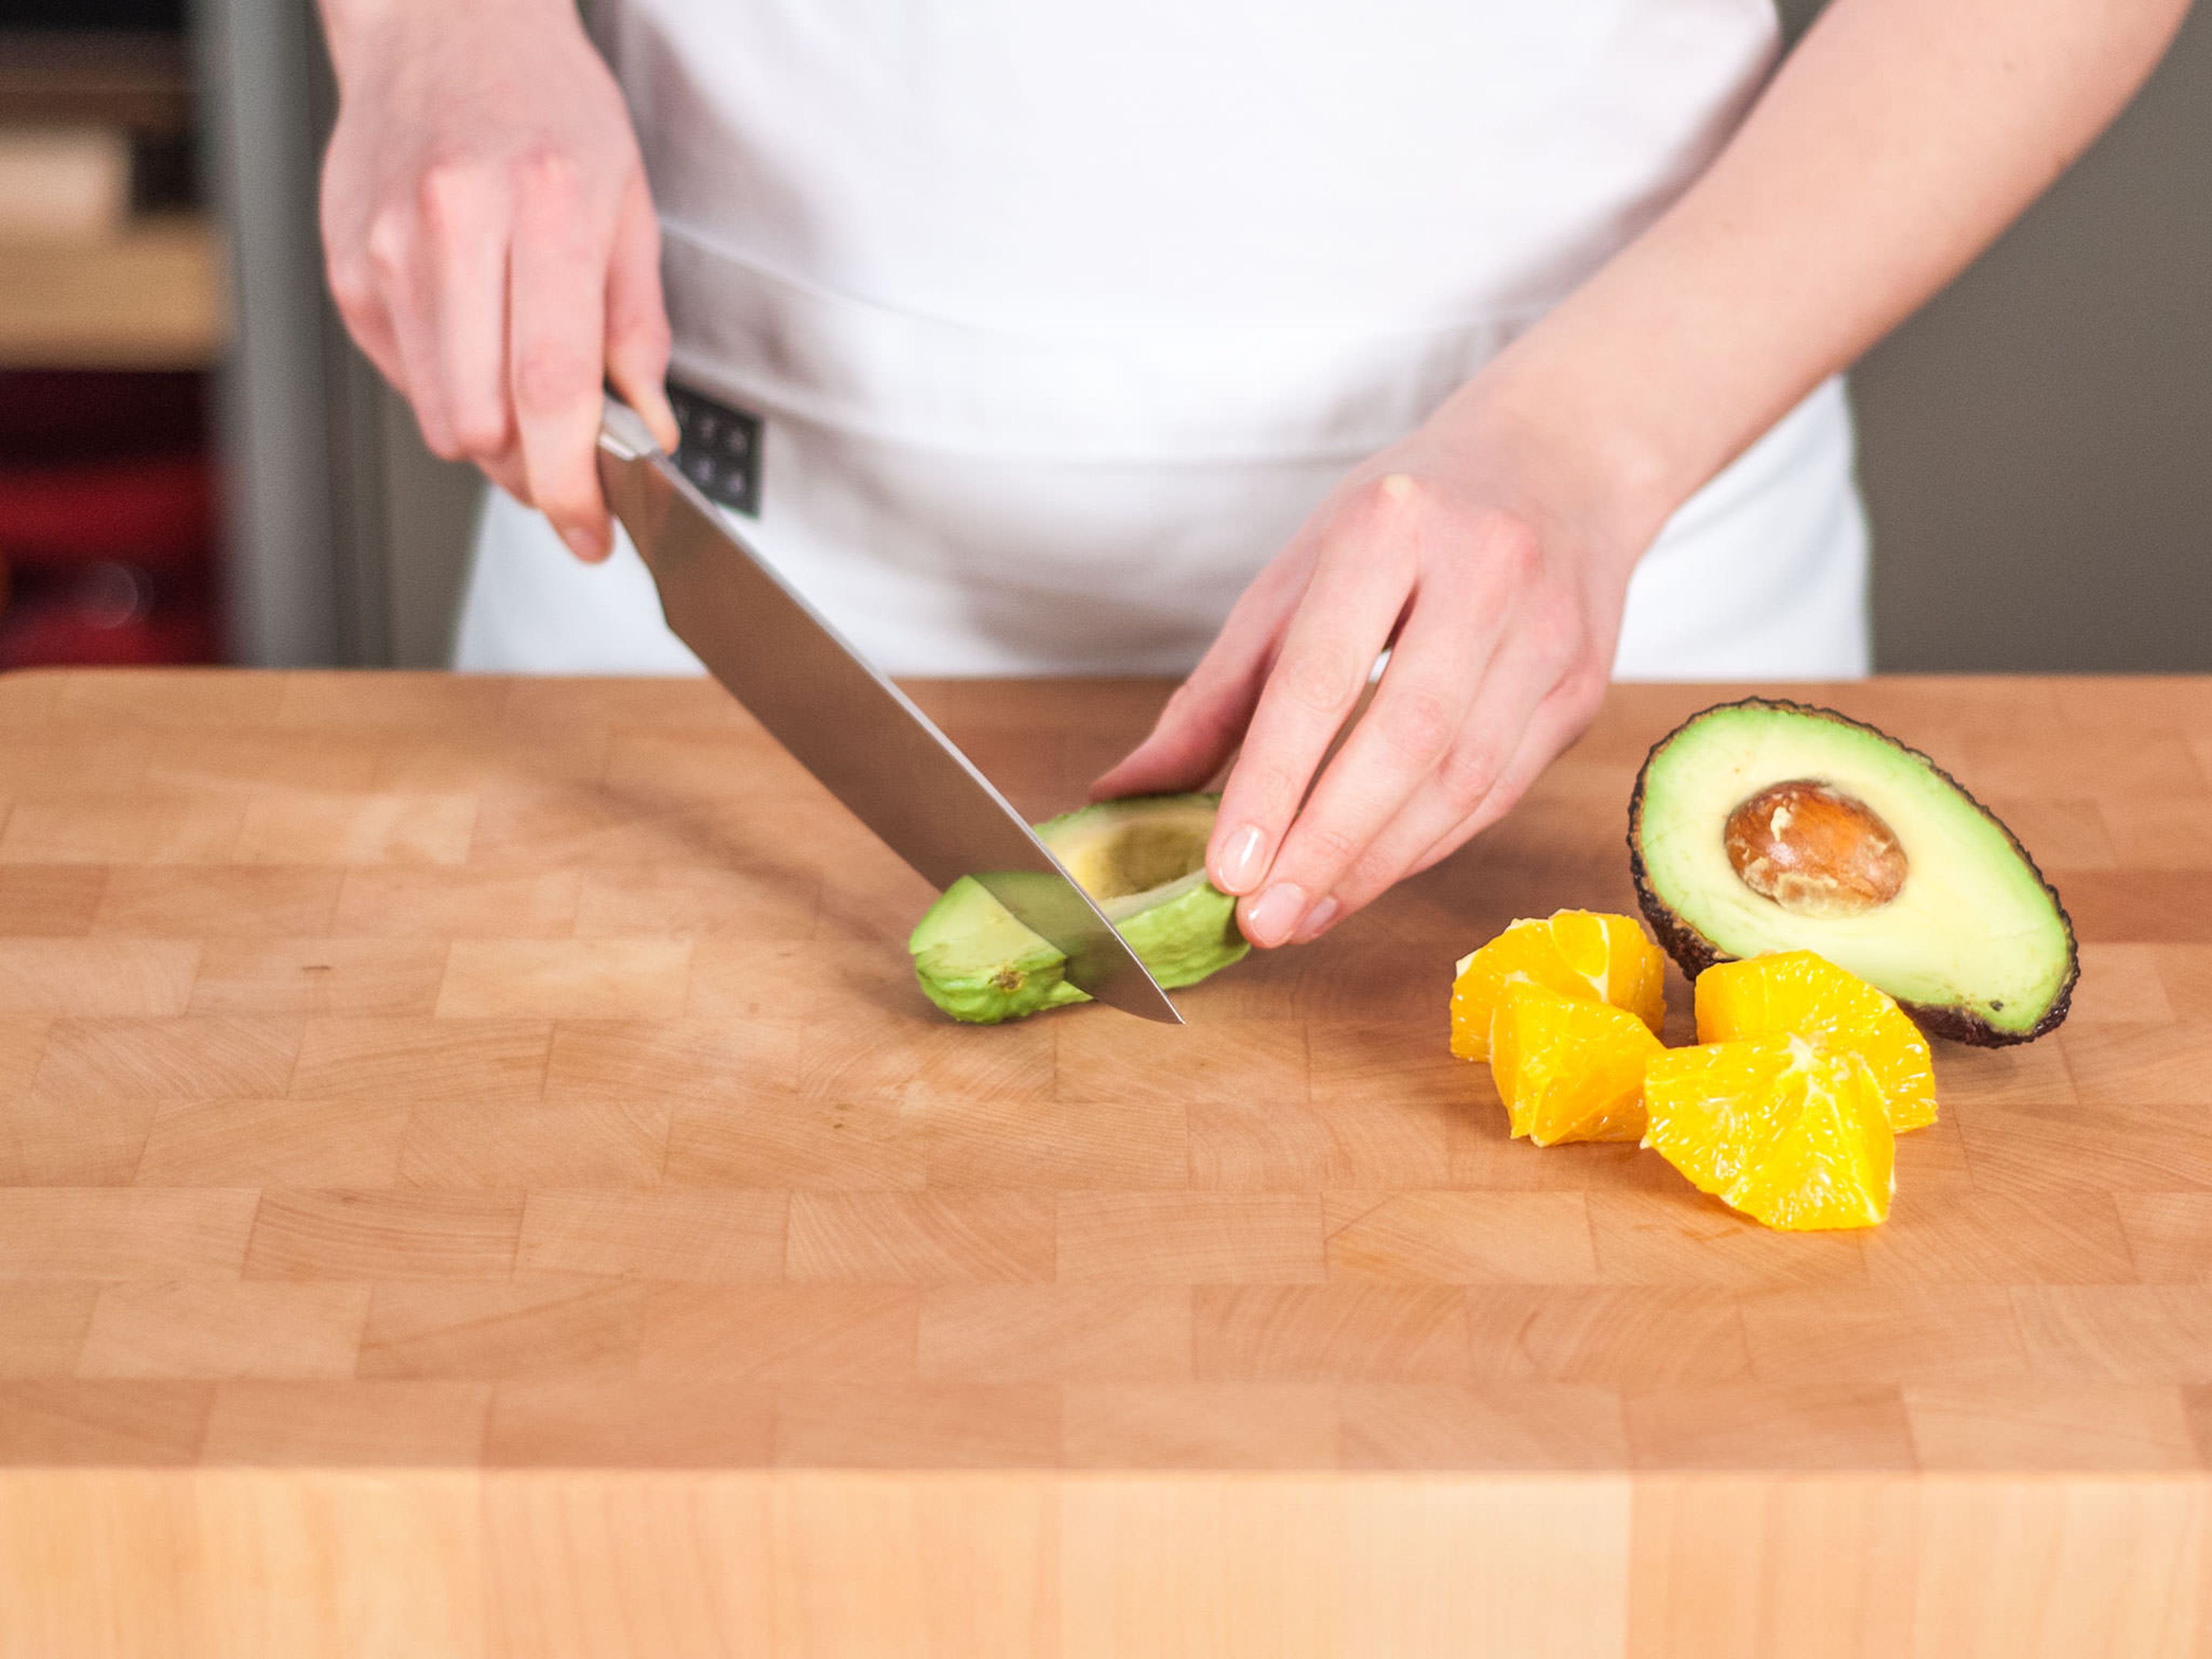 Peel half of the oranges, remove pits and cut into chunks. Peel and pit avocado and roughly chop.